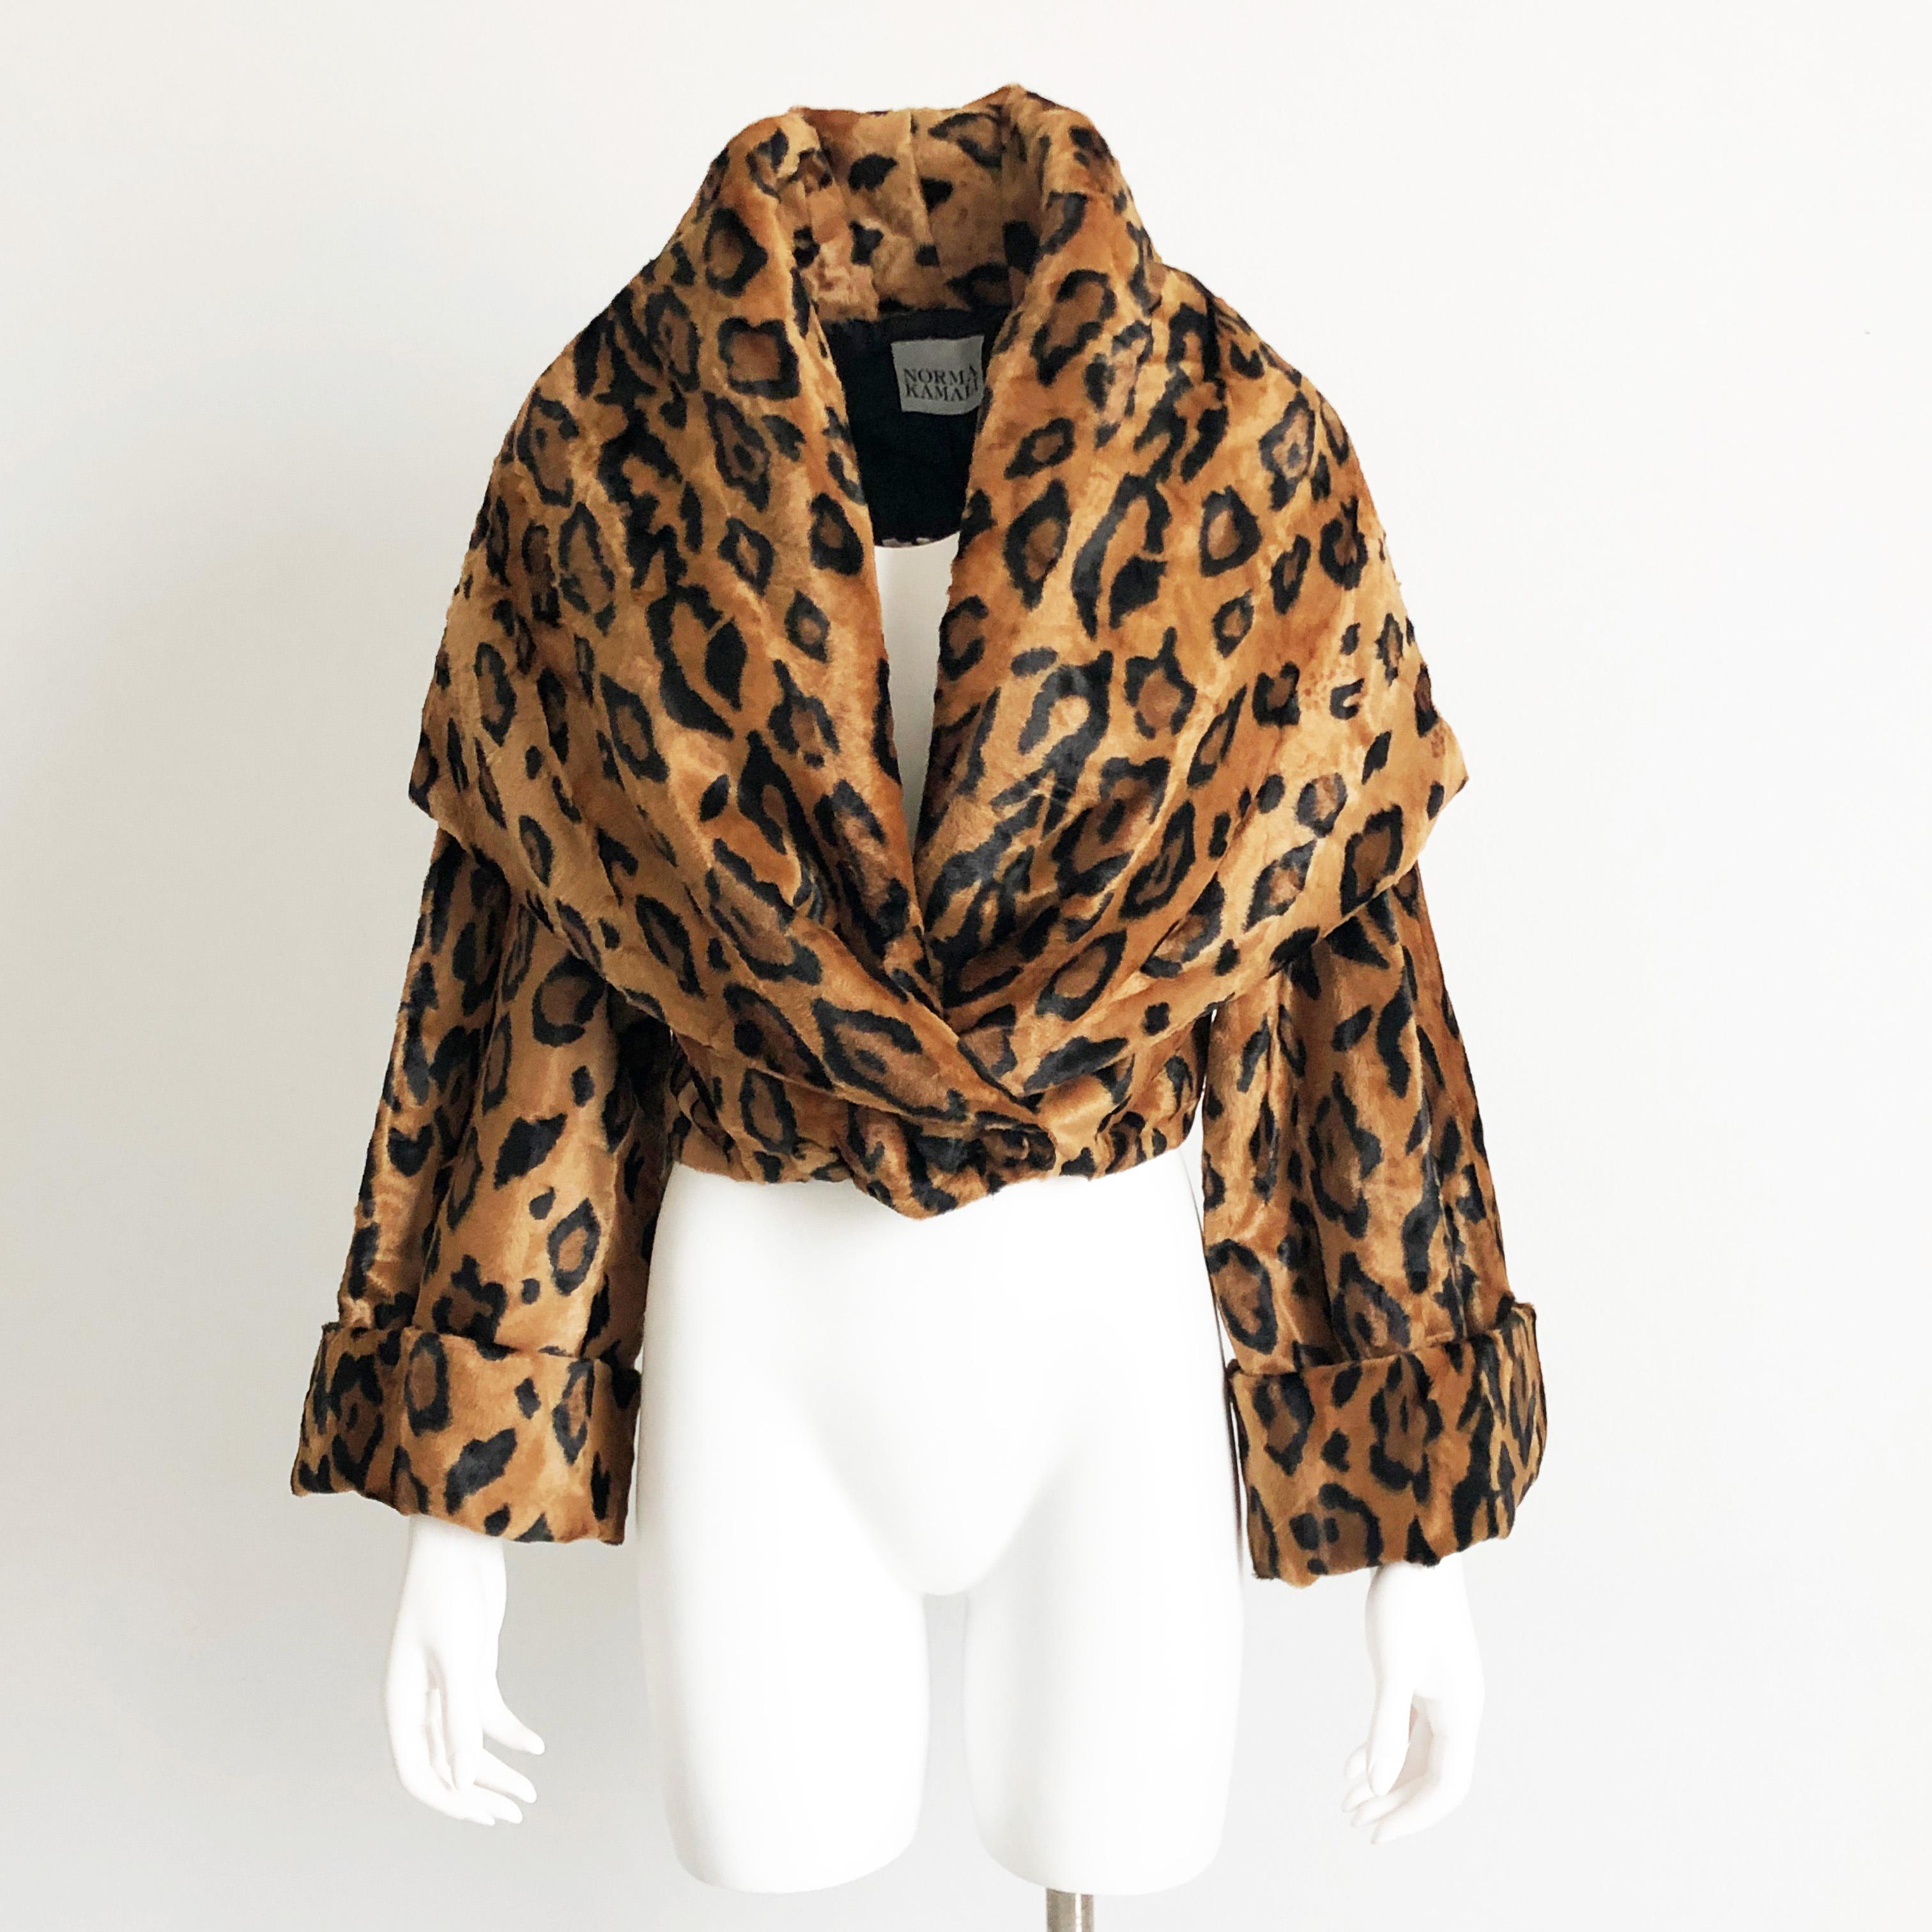 Vintage Norma Kamali Cropped Tiger Print Faux Fur Jacket with Shawl Collar, circa the 1980s. A similar piece is for sale on the designers vintage website for $7000+ (and shows it being worn by Madonna in the 80s). Huge shawl collar can be worn many